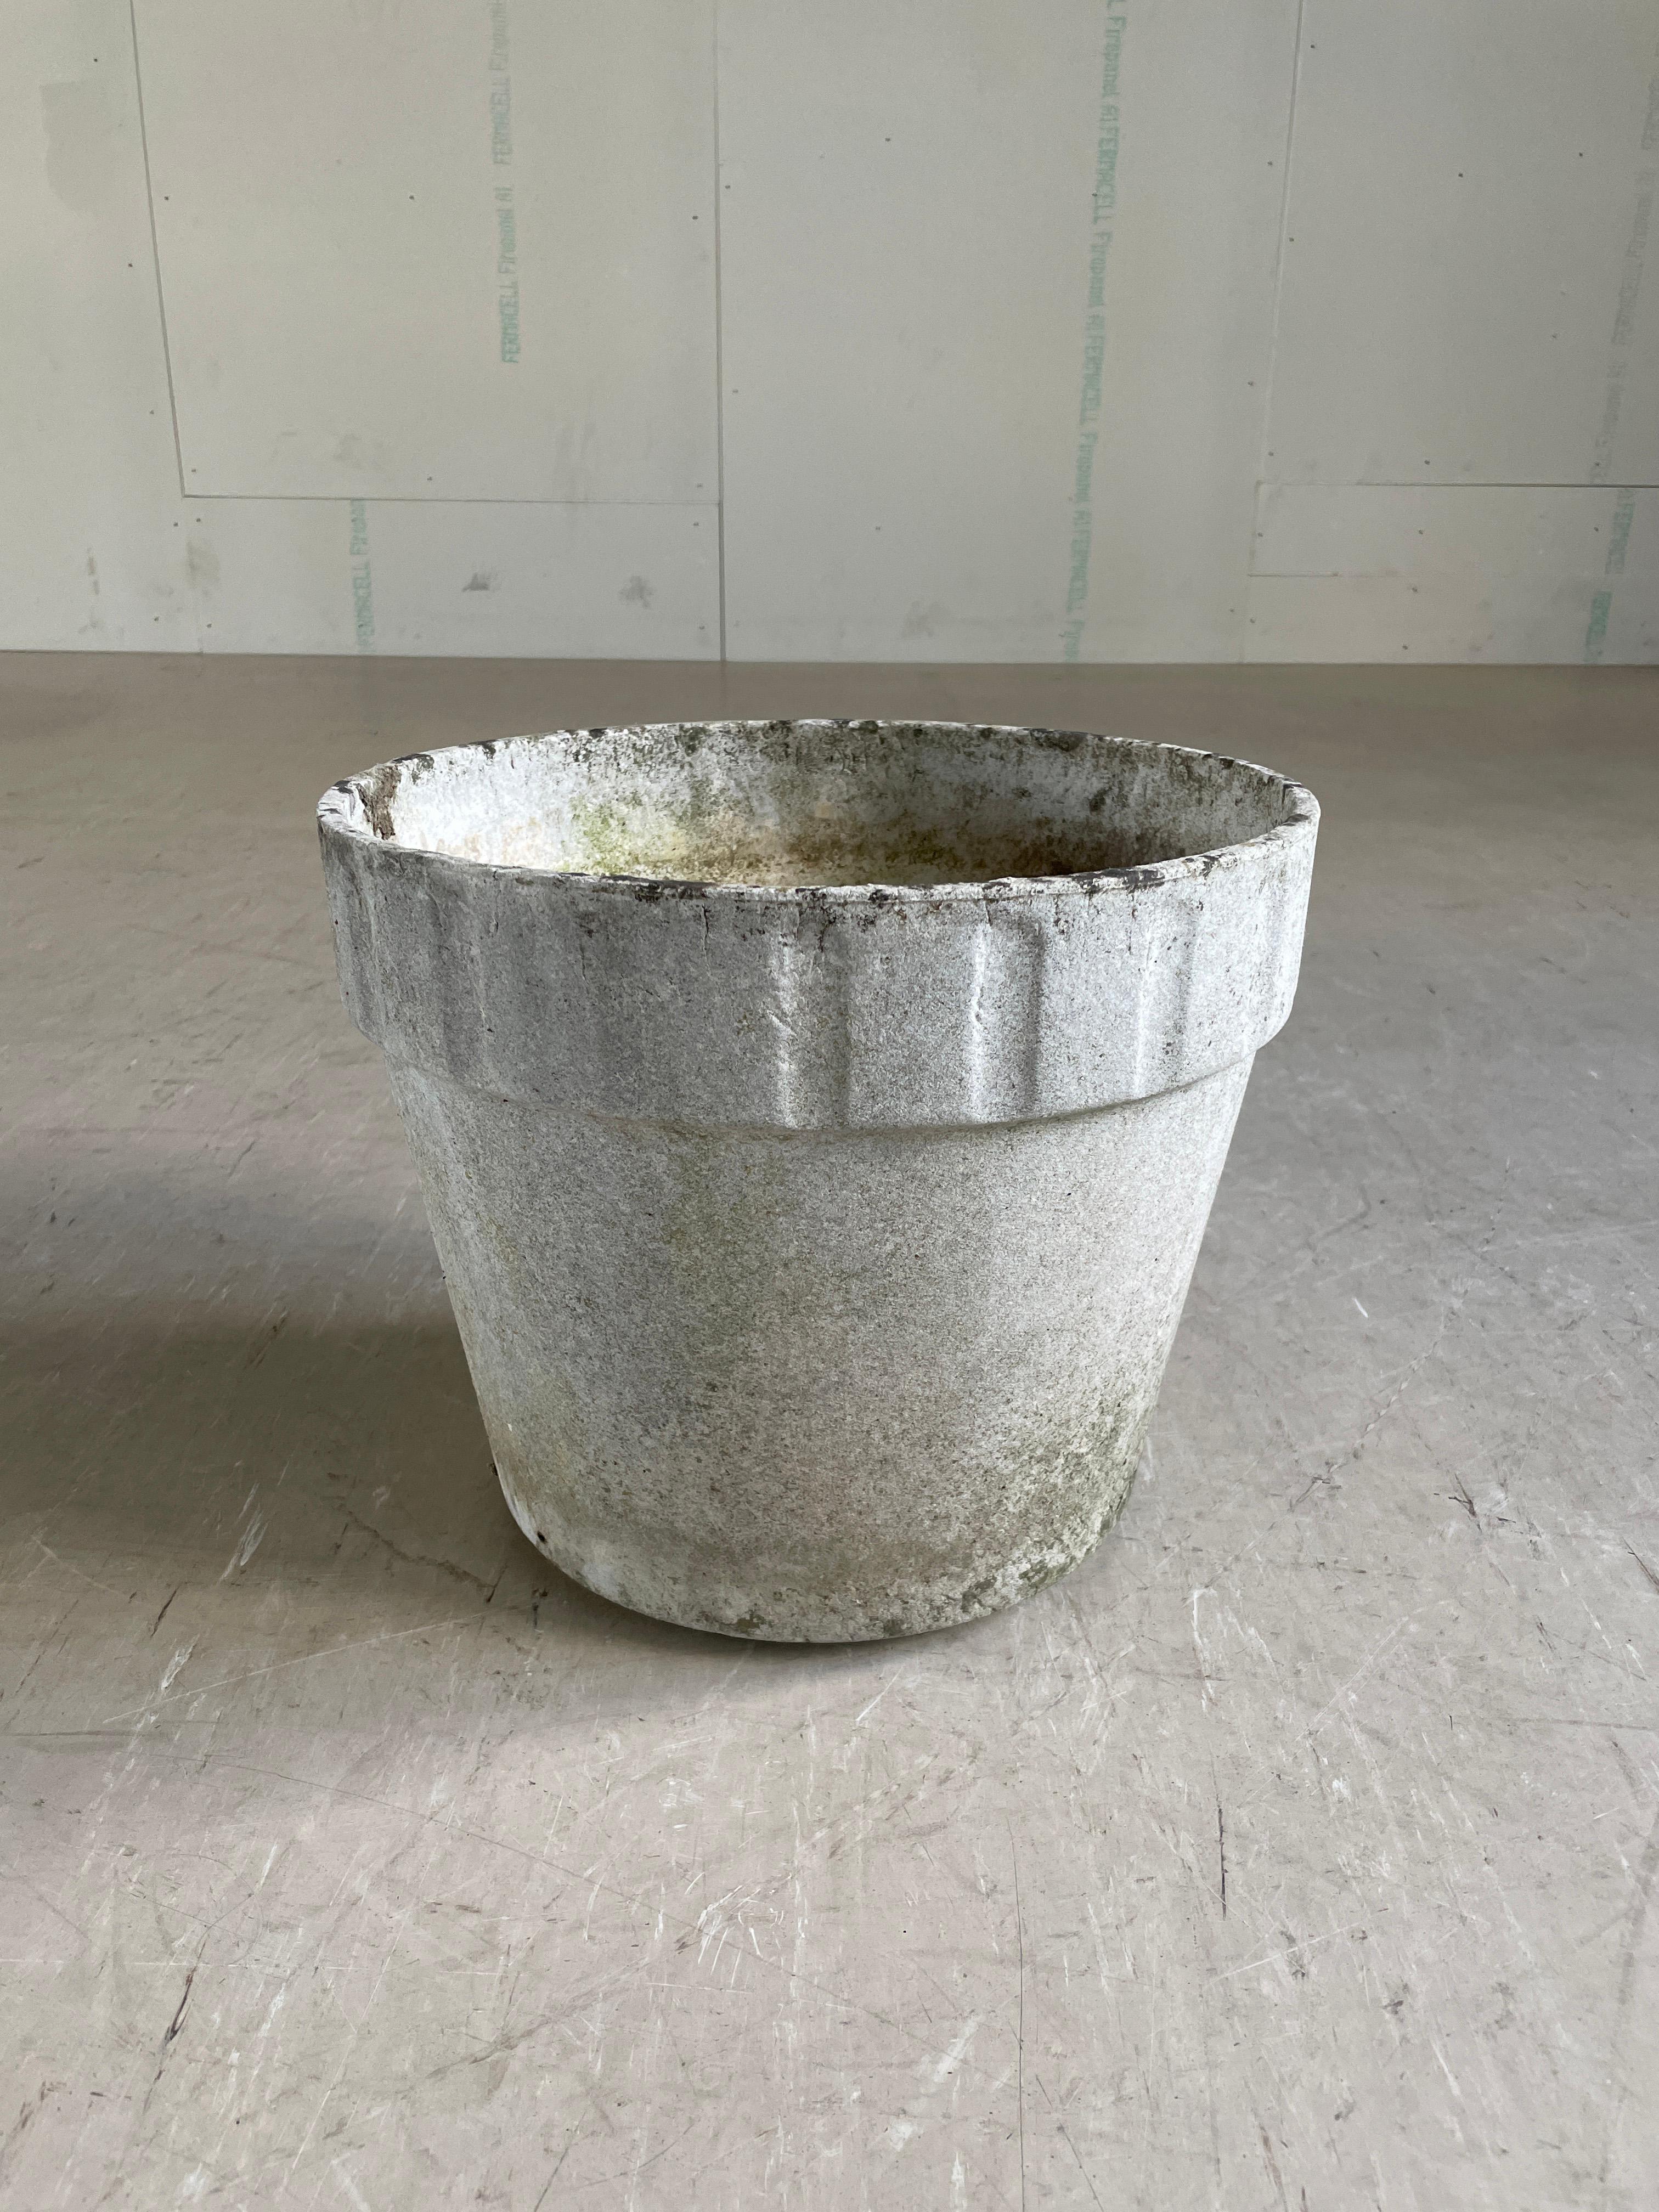 Monumental concrete flower pot by Swiss designer, Willy Guhl. Solid concrete made in Switzerland 1960 - 1970. Produced by Eternit AG.  Tapered structure with a ribbed upper section with drainage holes in base. In original condition with beautiful